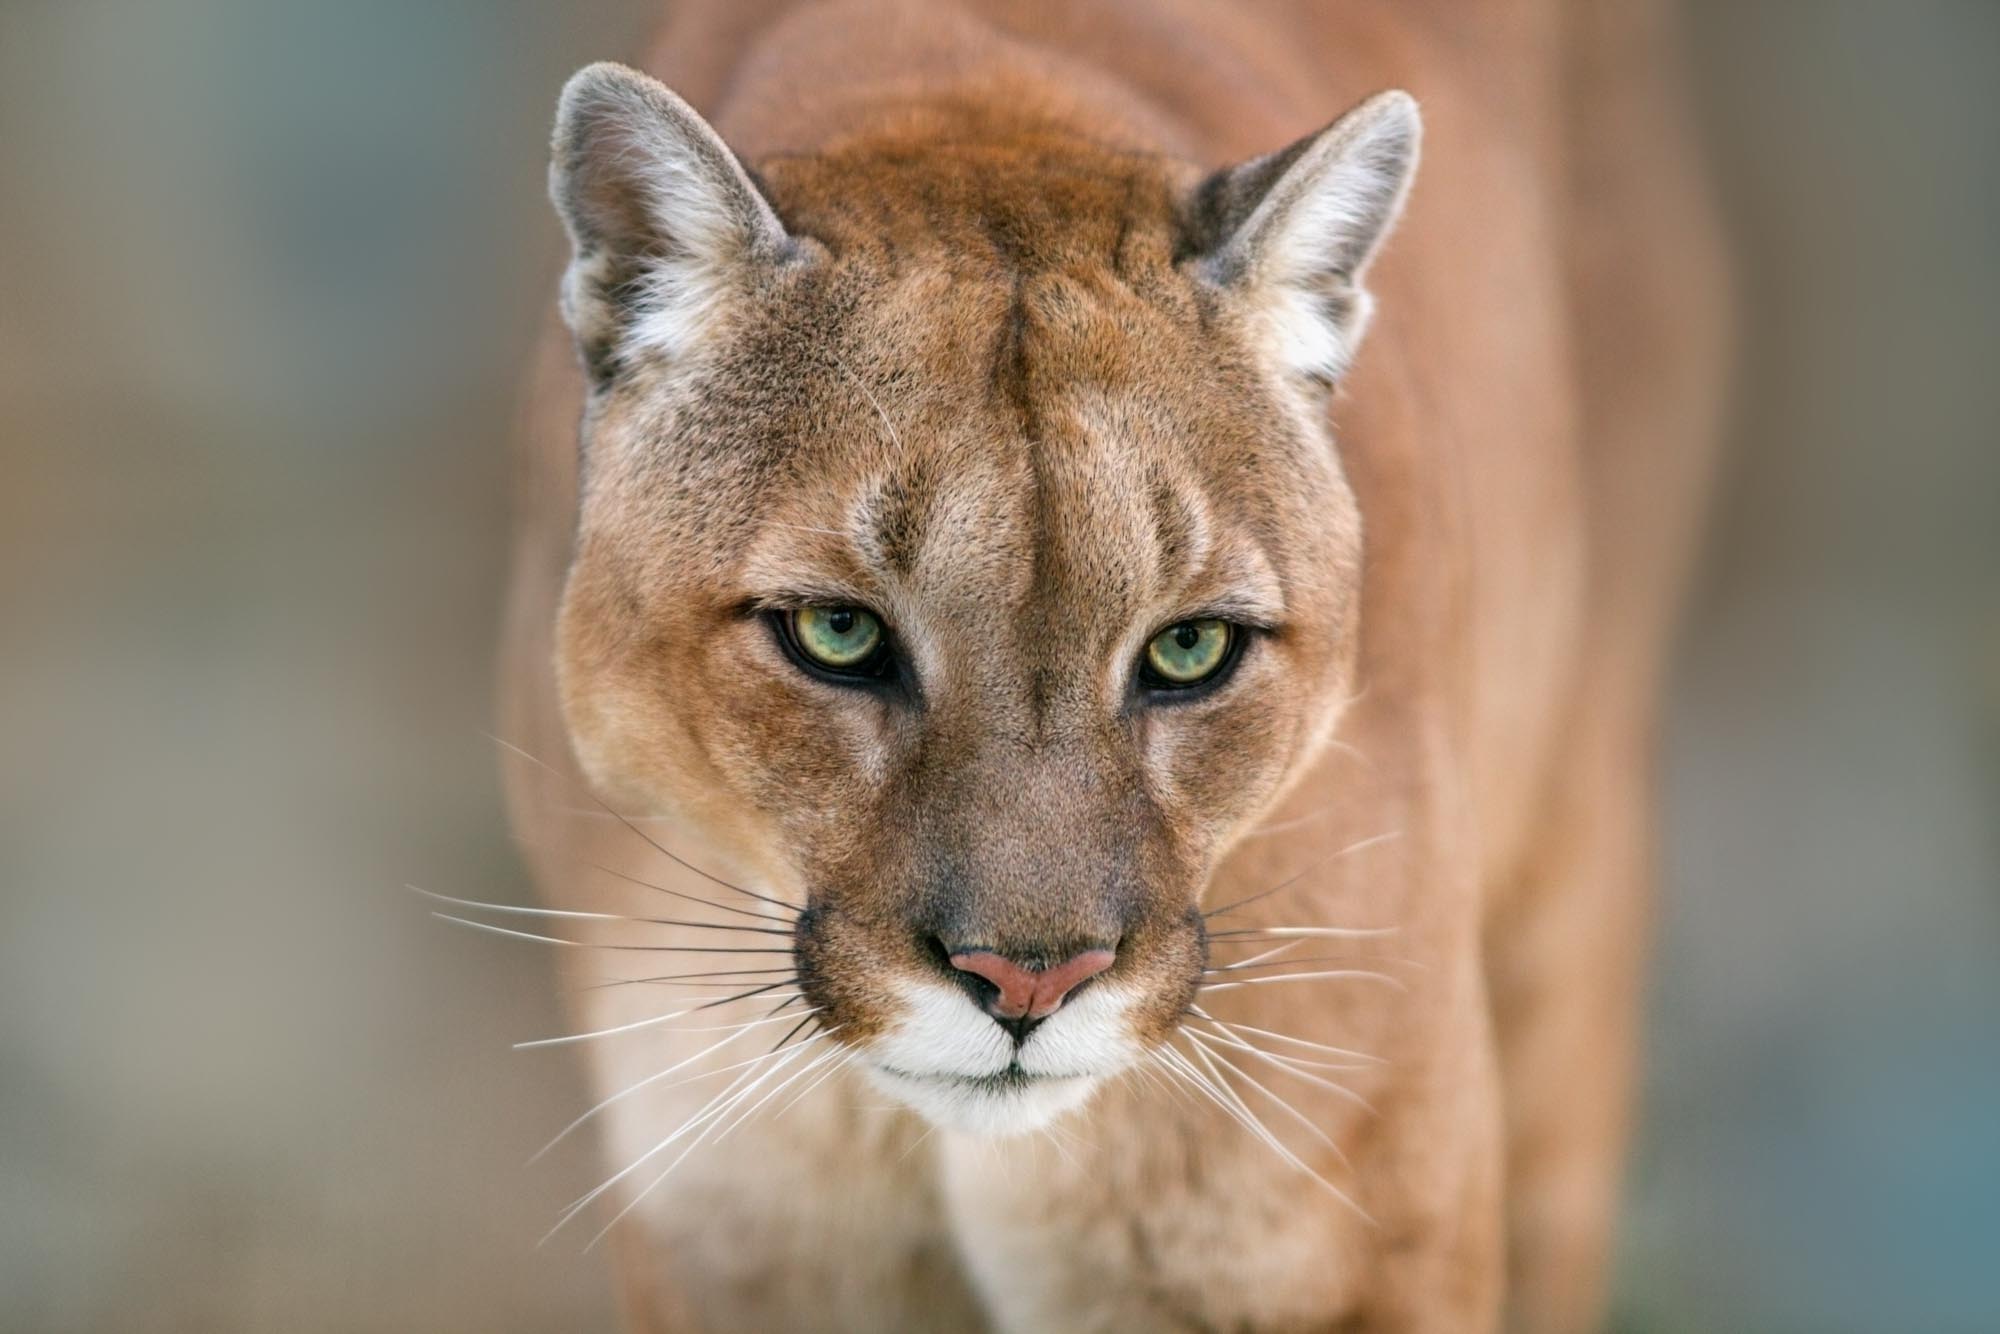 Cougar (Puma Concolor) - Lifestyle, Diet, and More - Wildlife Explained